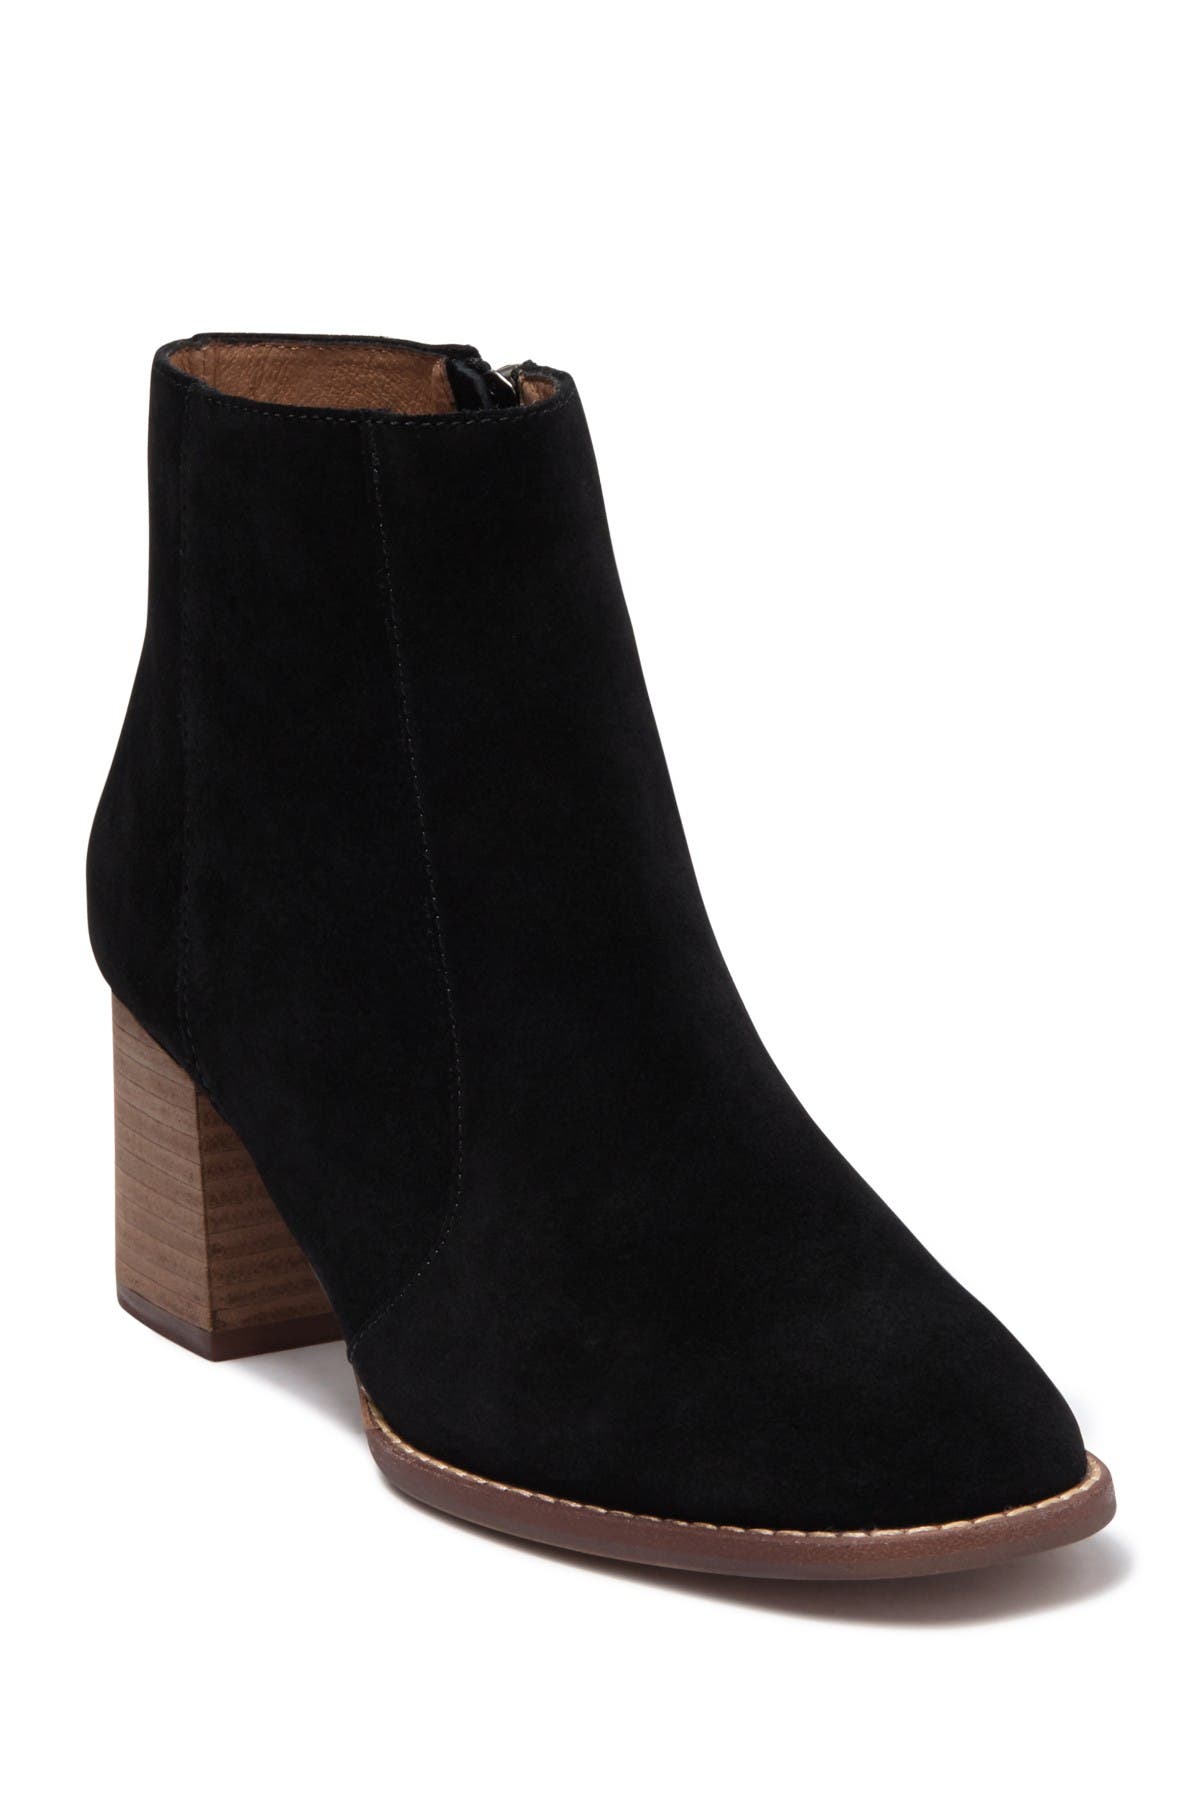 Madewell | Bryce Suede Chelsea Boot 